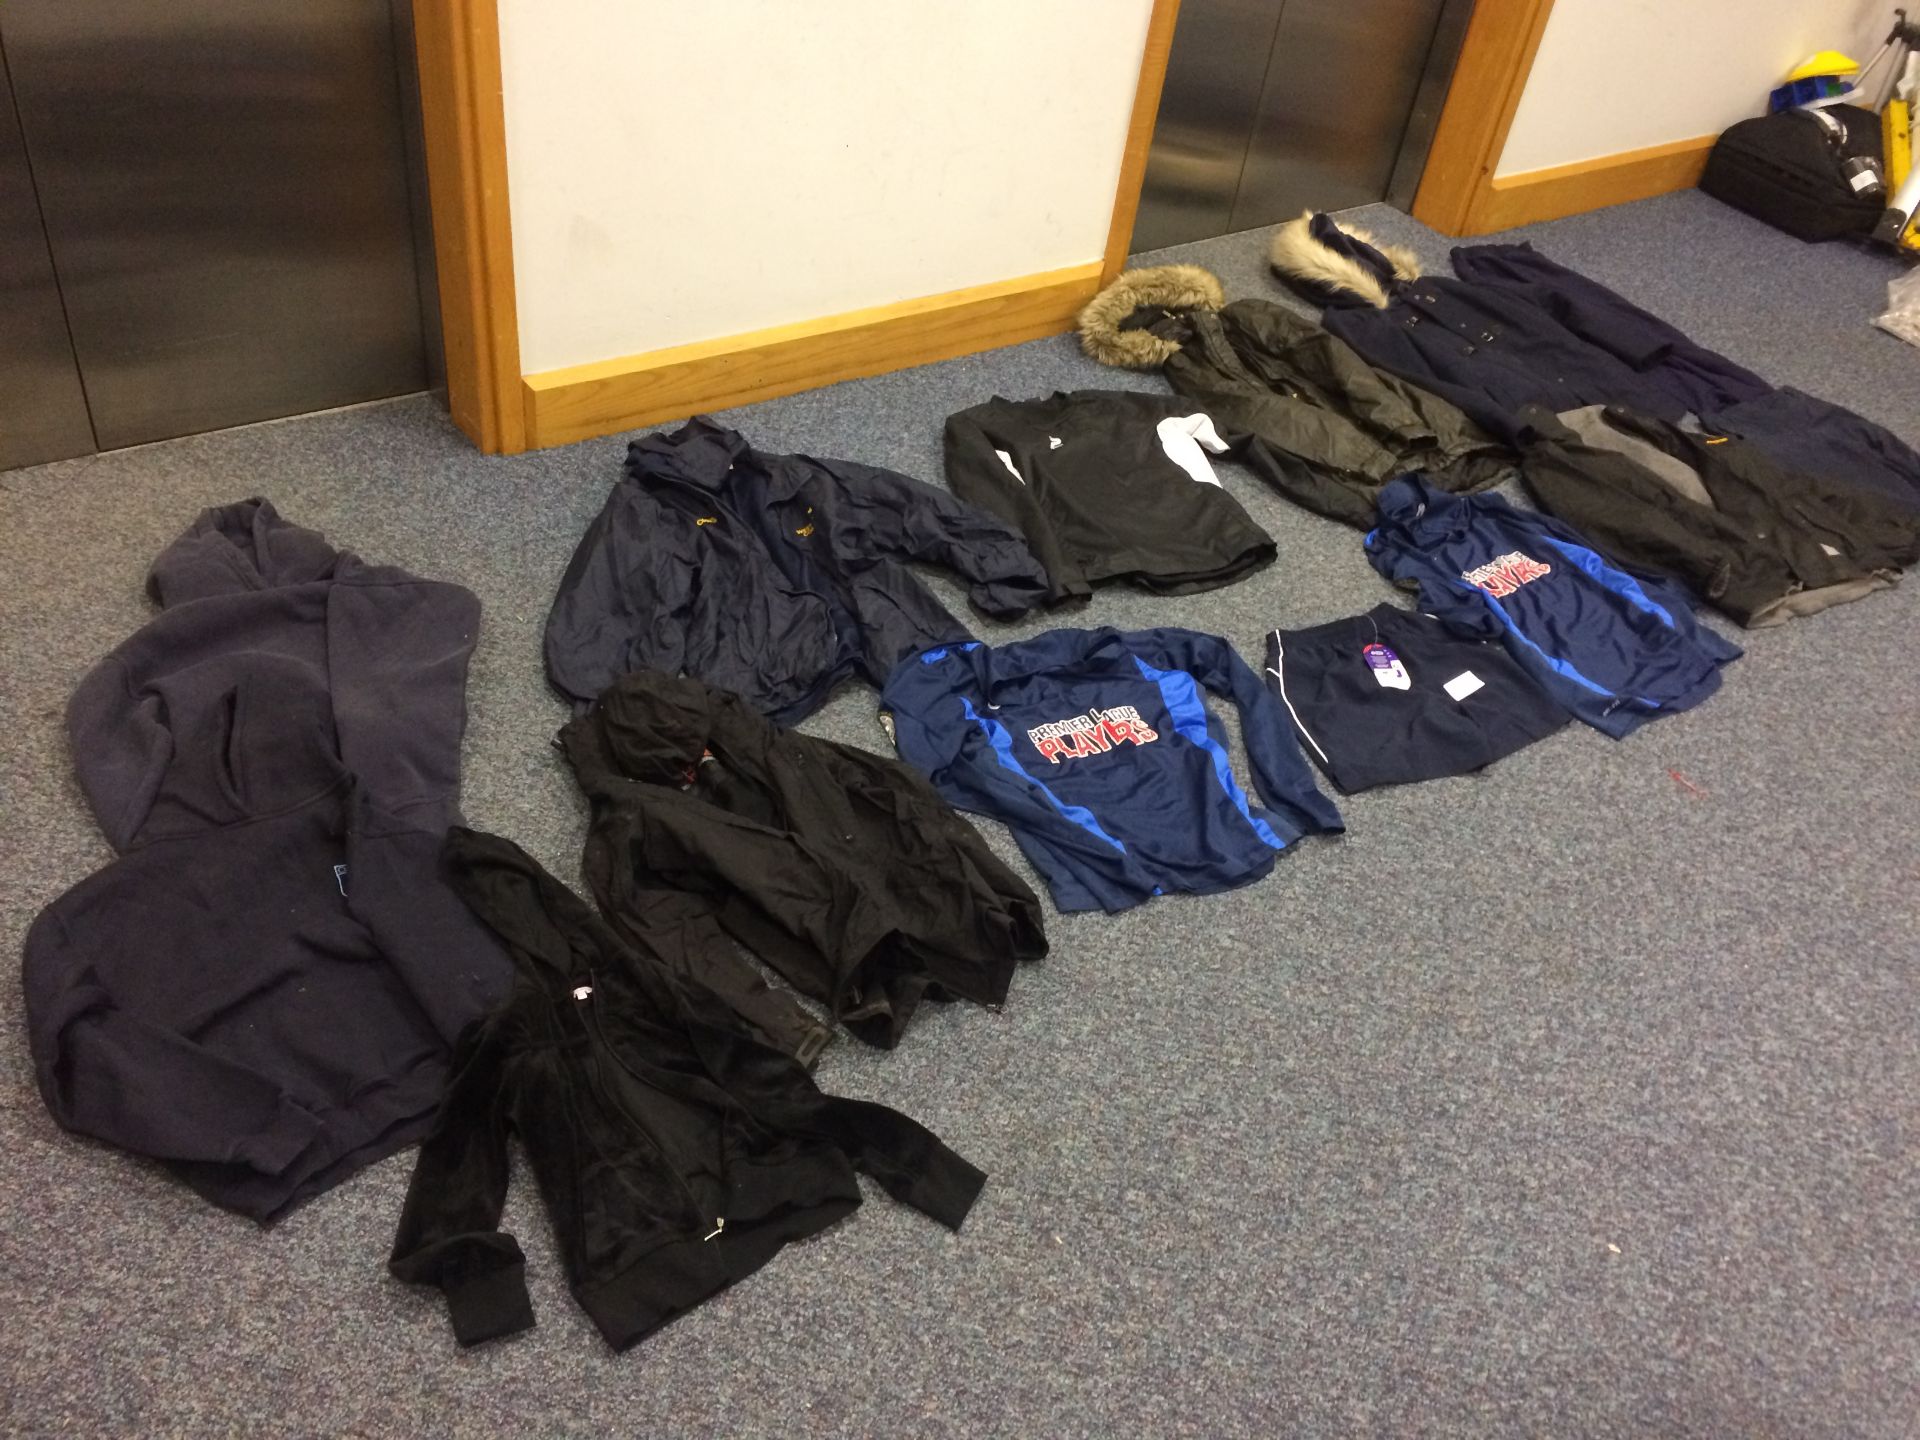 Job Lot Of Clothing Lost Property Unclaimed - Image 2 of 5